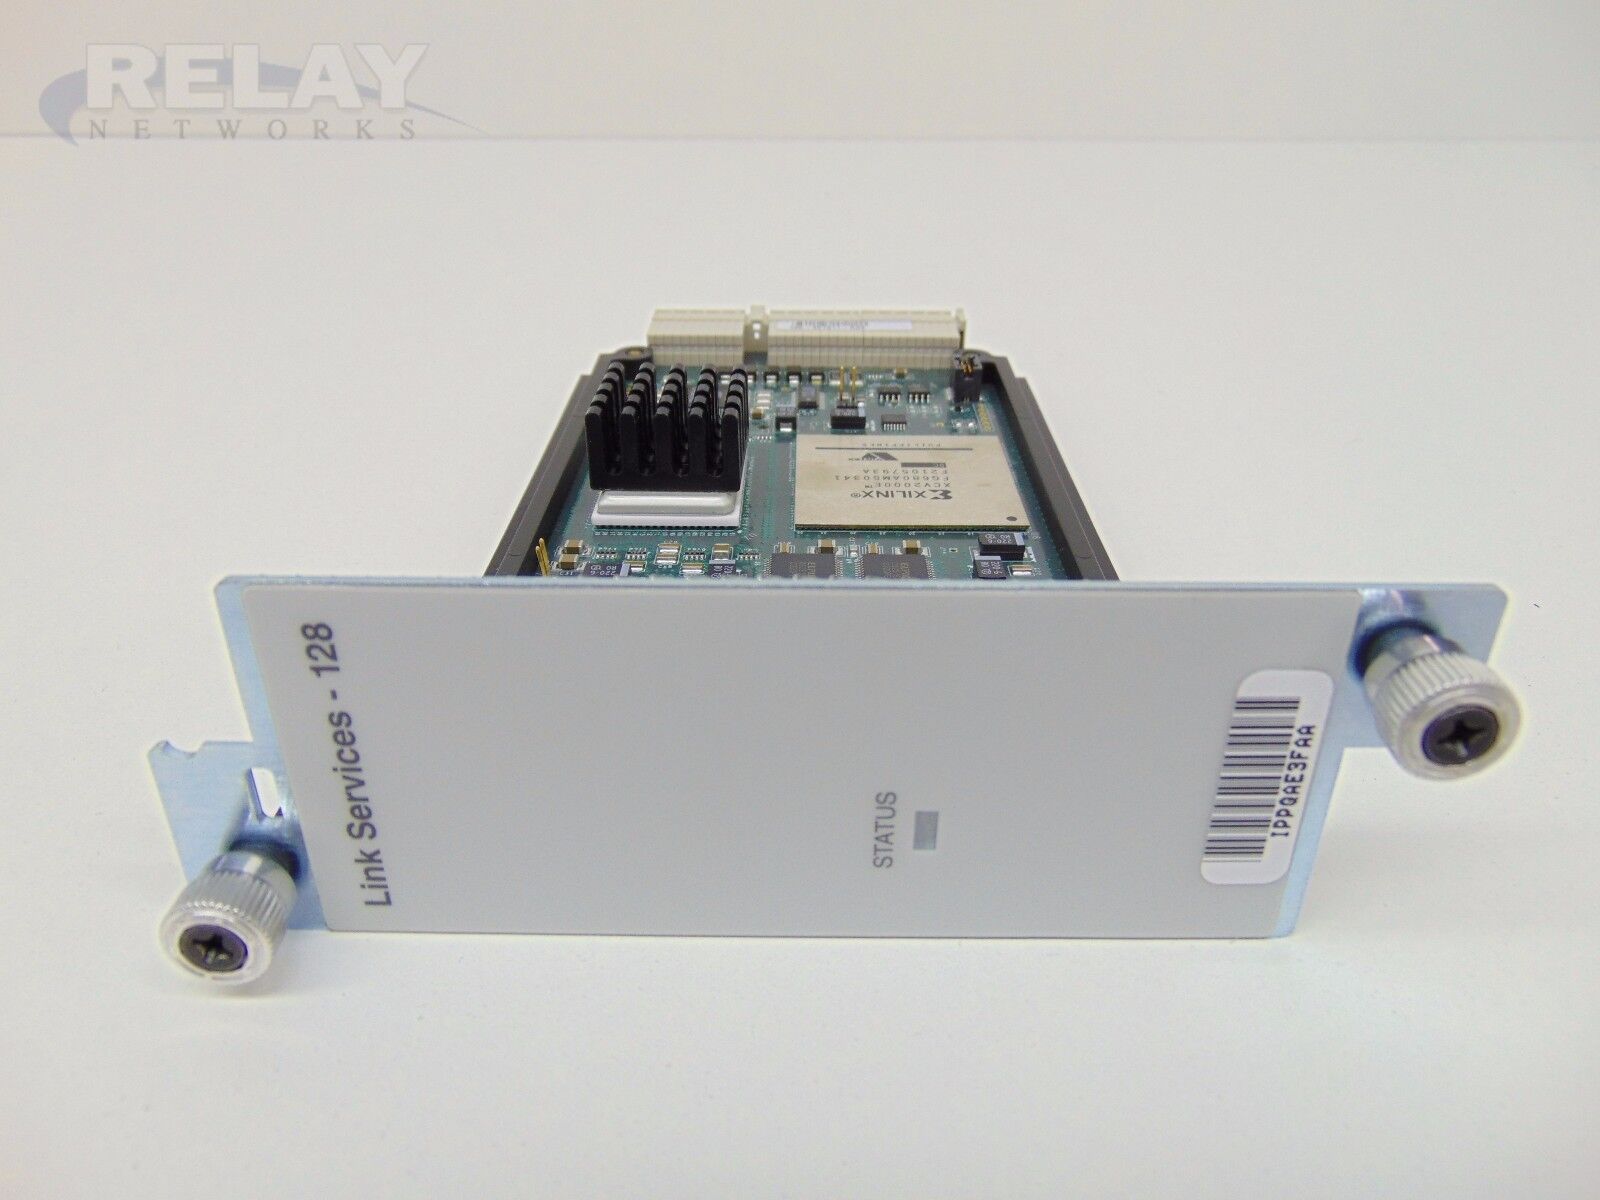 JUNIPER PB-LS-128 Link Services PIC Physical Interface Card M5 M7i M40e Routers